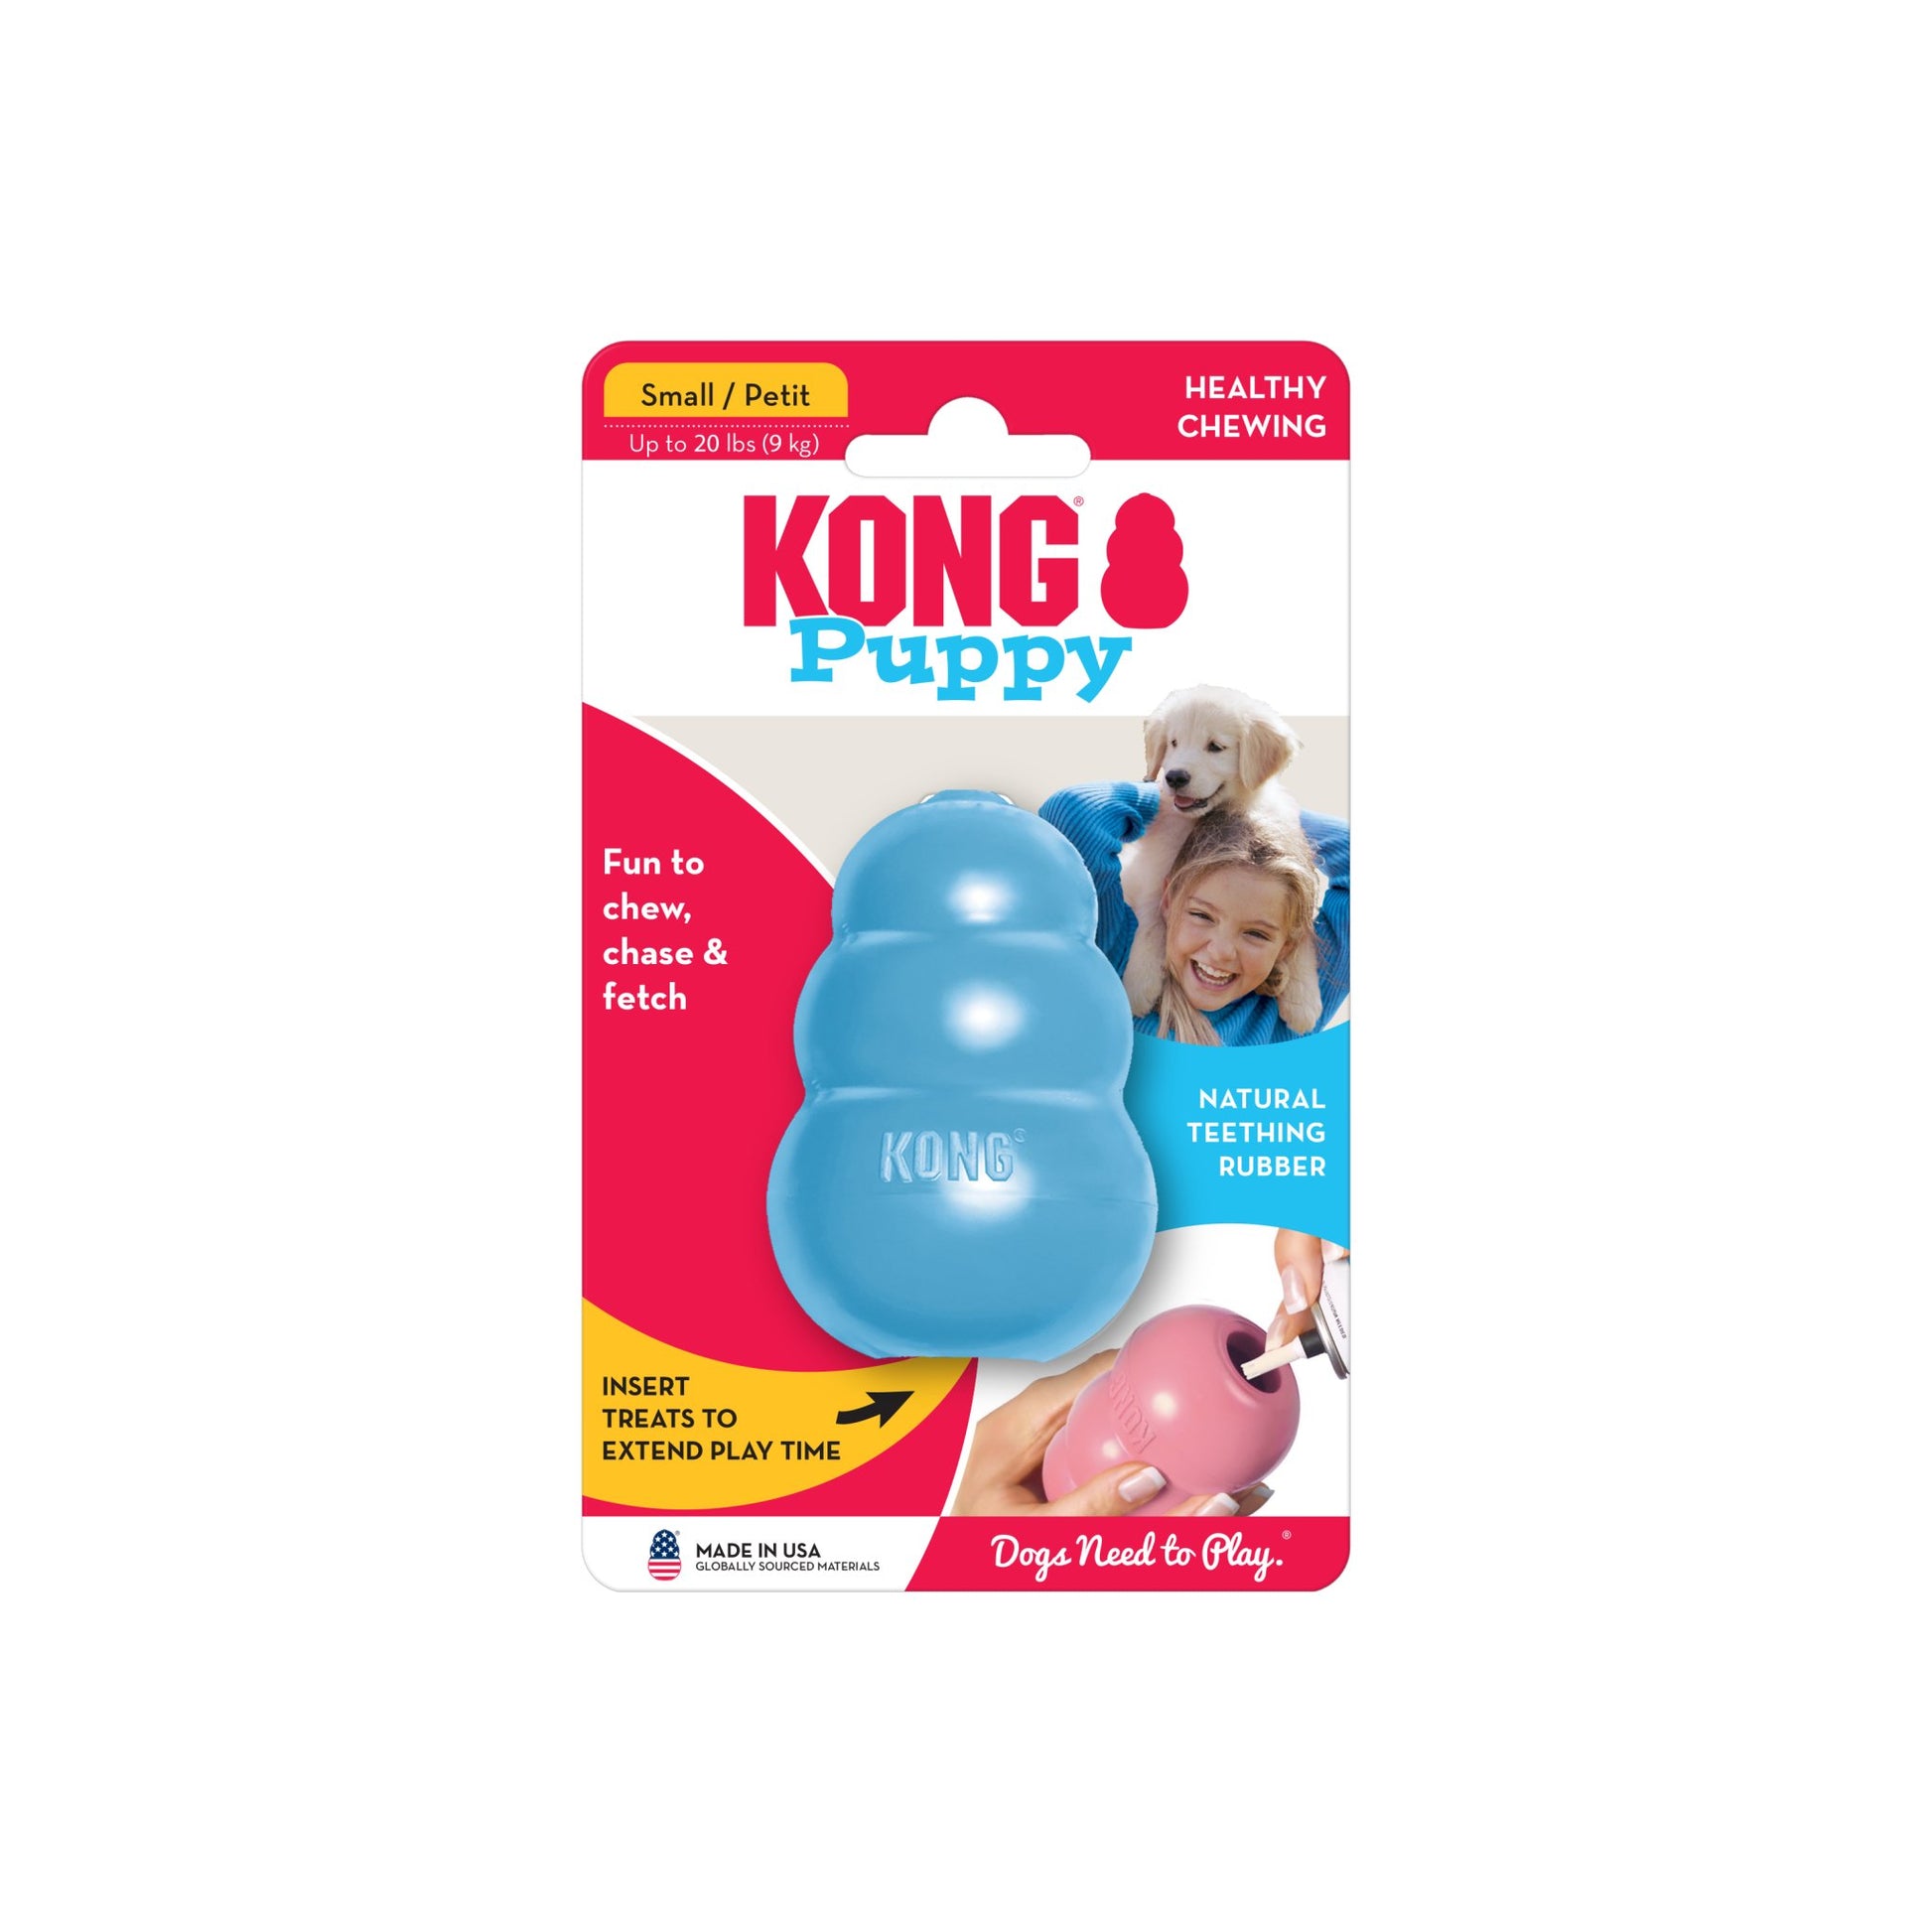 Kong Puppy - Tuck In Healthy Pet Food & Animal Natural Health Supplies